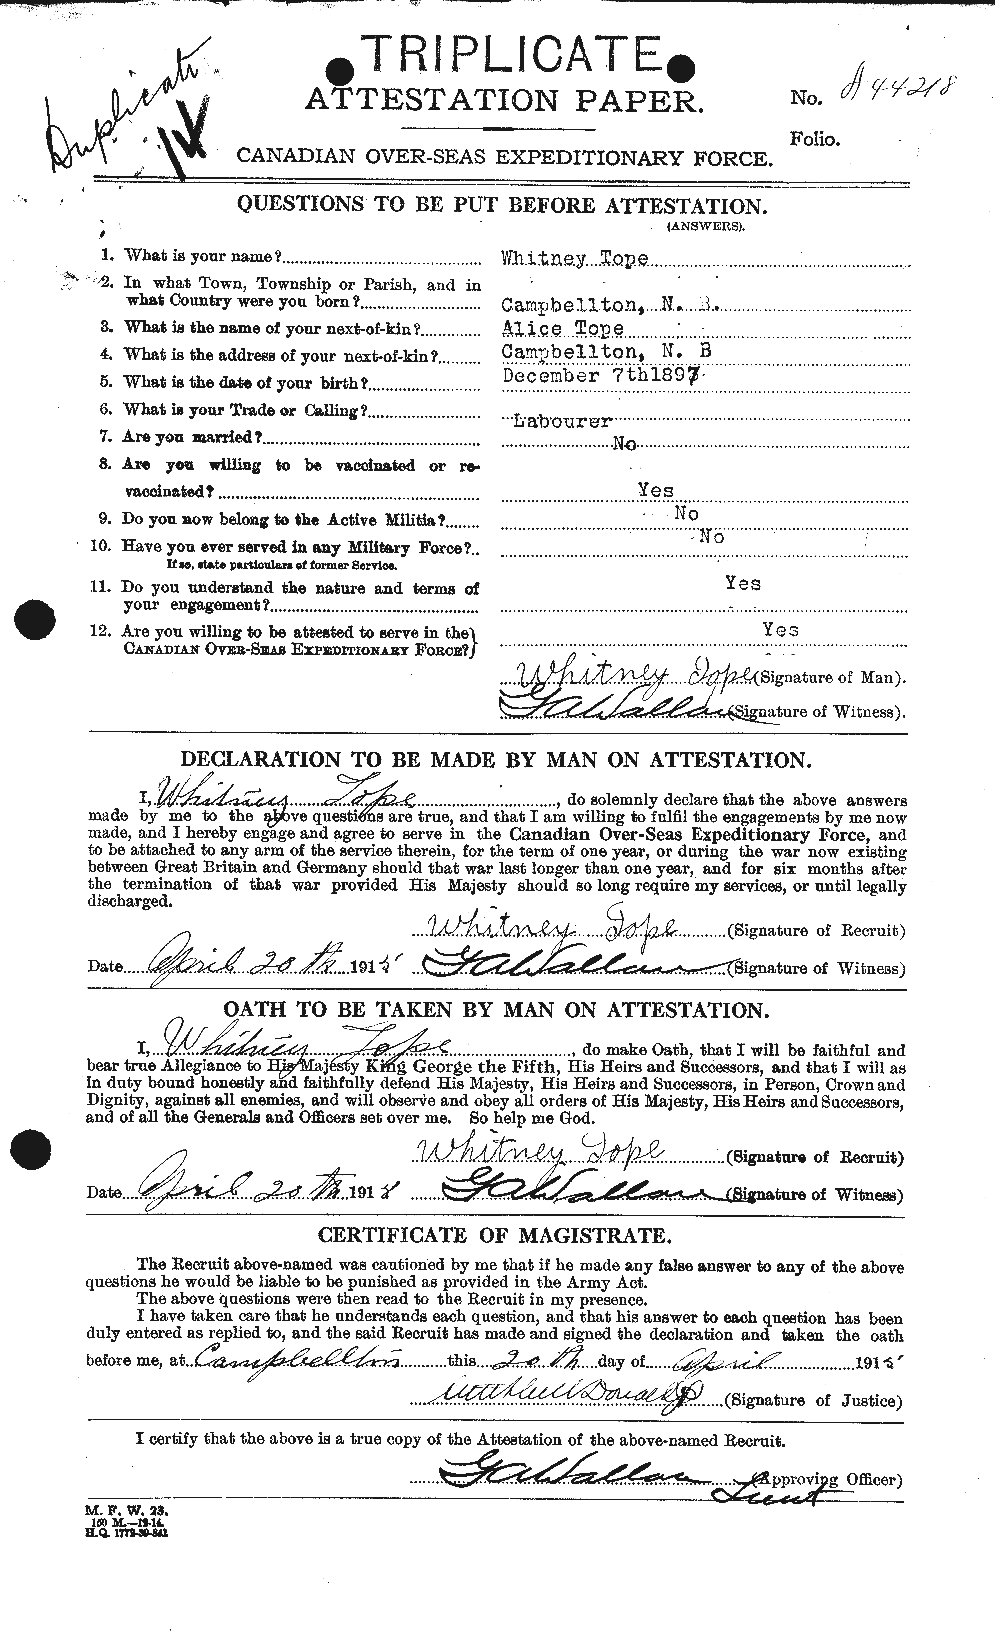 Personnel Records of the First World War - CEF 645749a